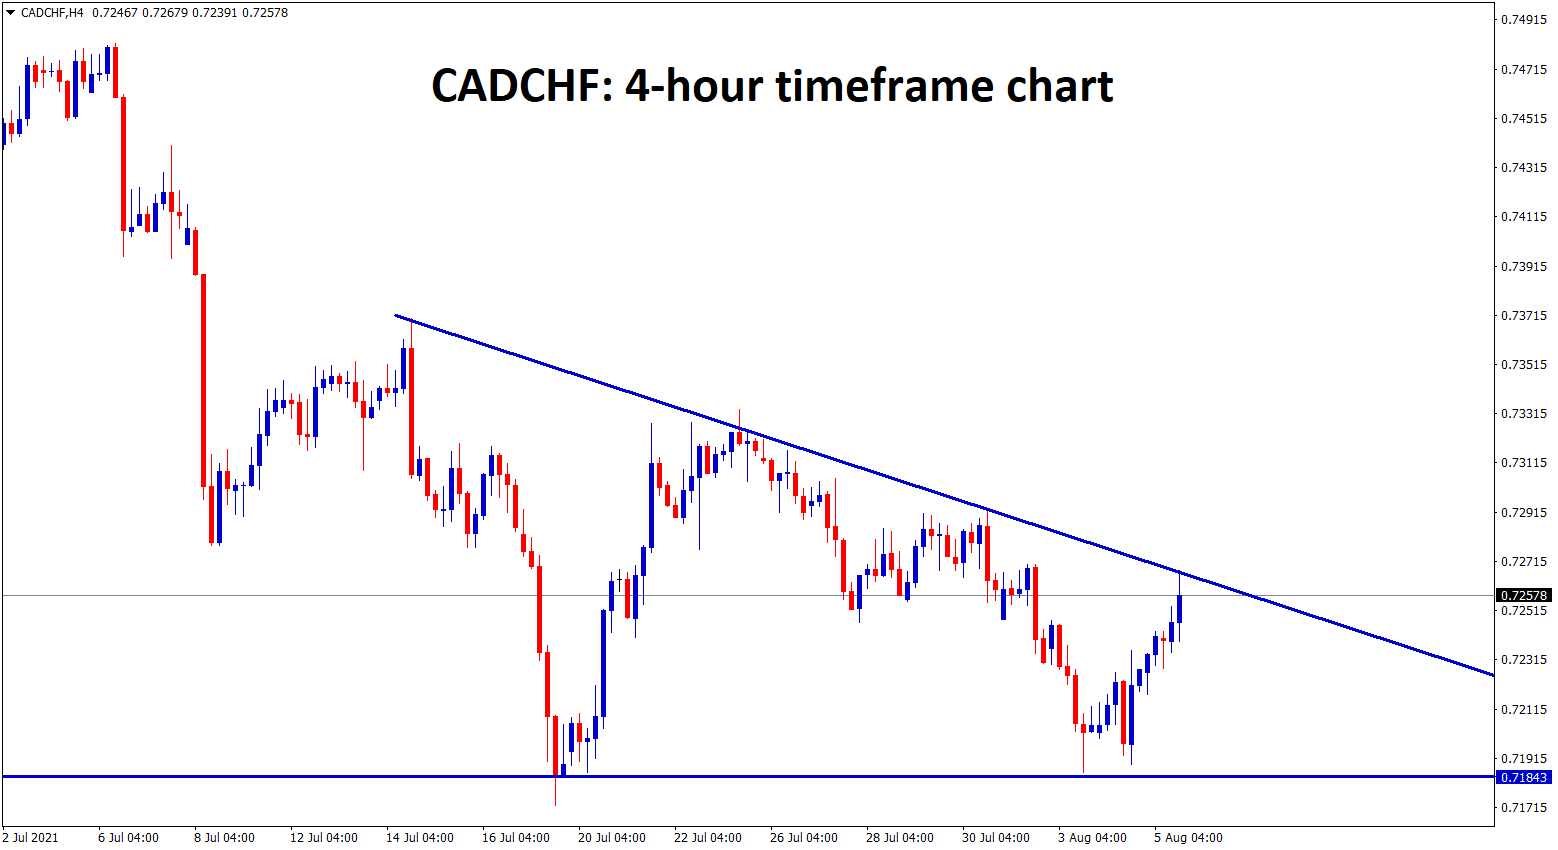 CADCHF formed a descending triangle pattern